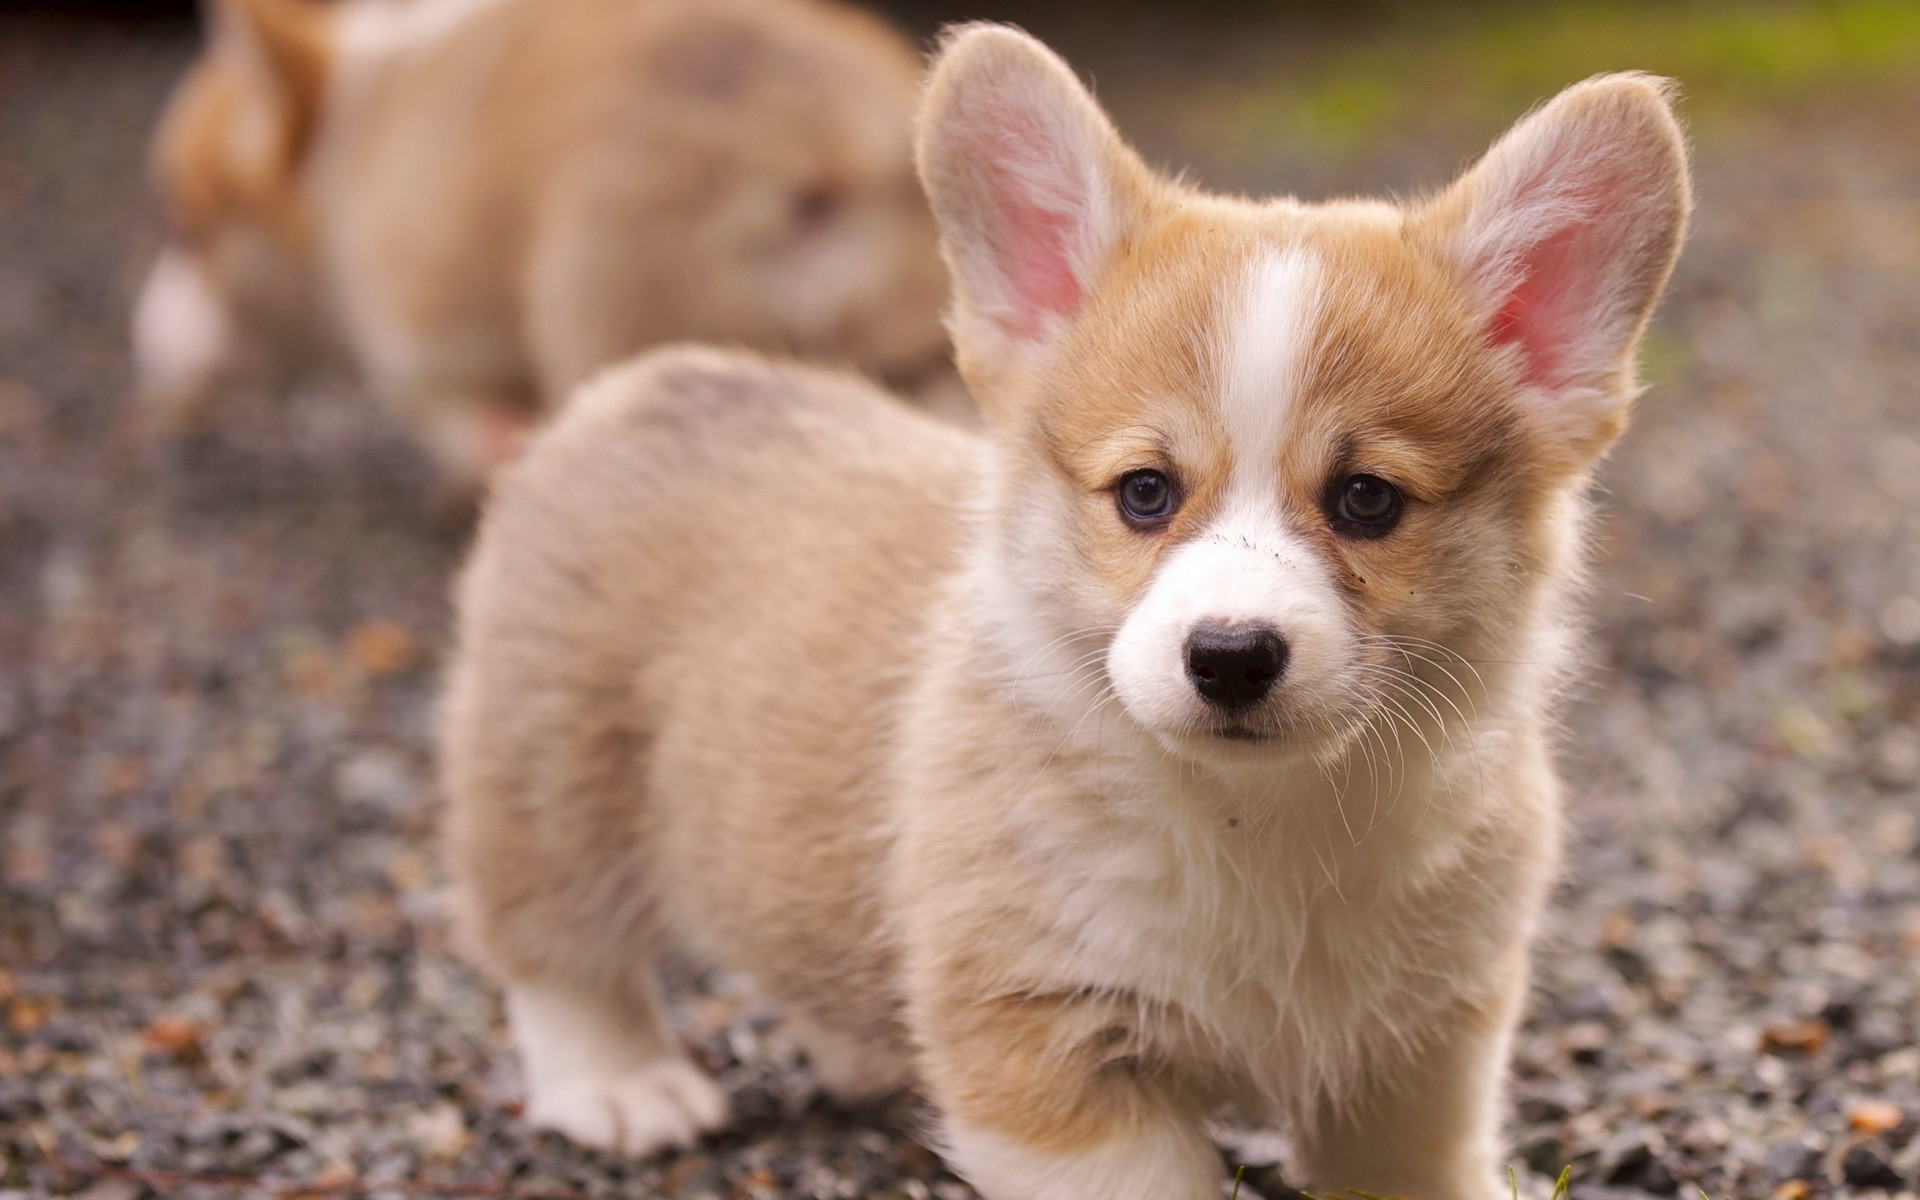 1920x1200 ... Cute Puppy Wallpaper Desktop, Images, Wallpapers of Cute Puppy in .